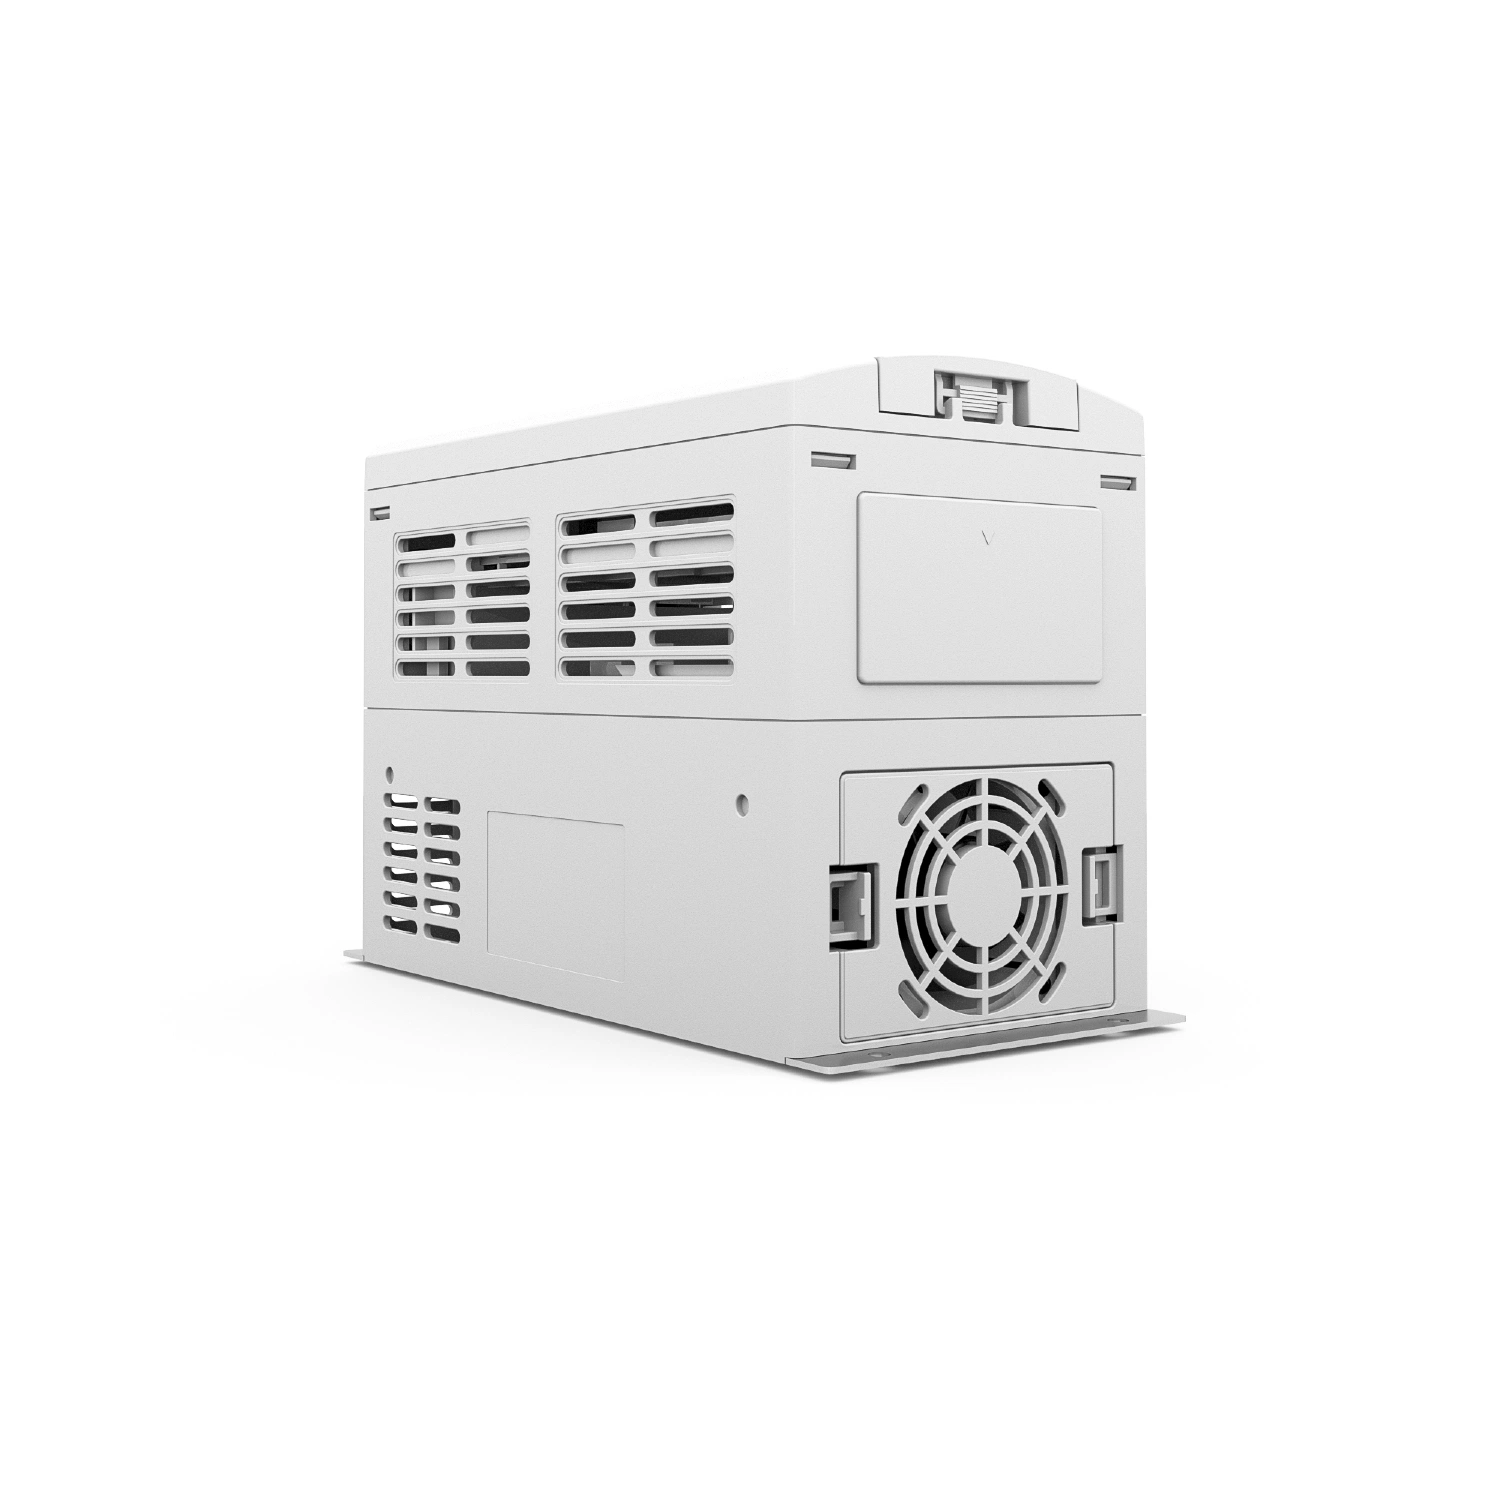 China Best Quality Low Voltage Frequency Inverter VFD Frequency Converter Sensorless Vector Control